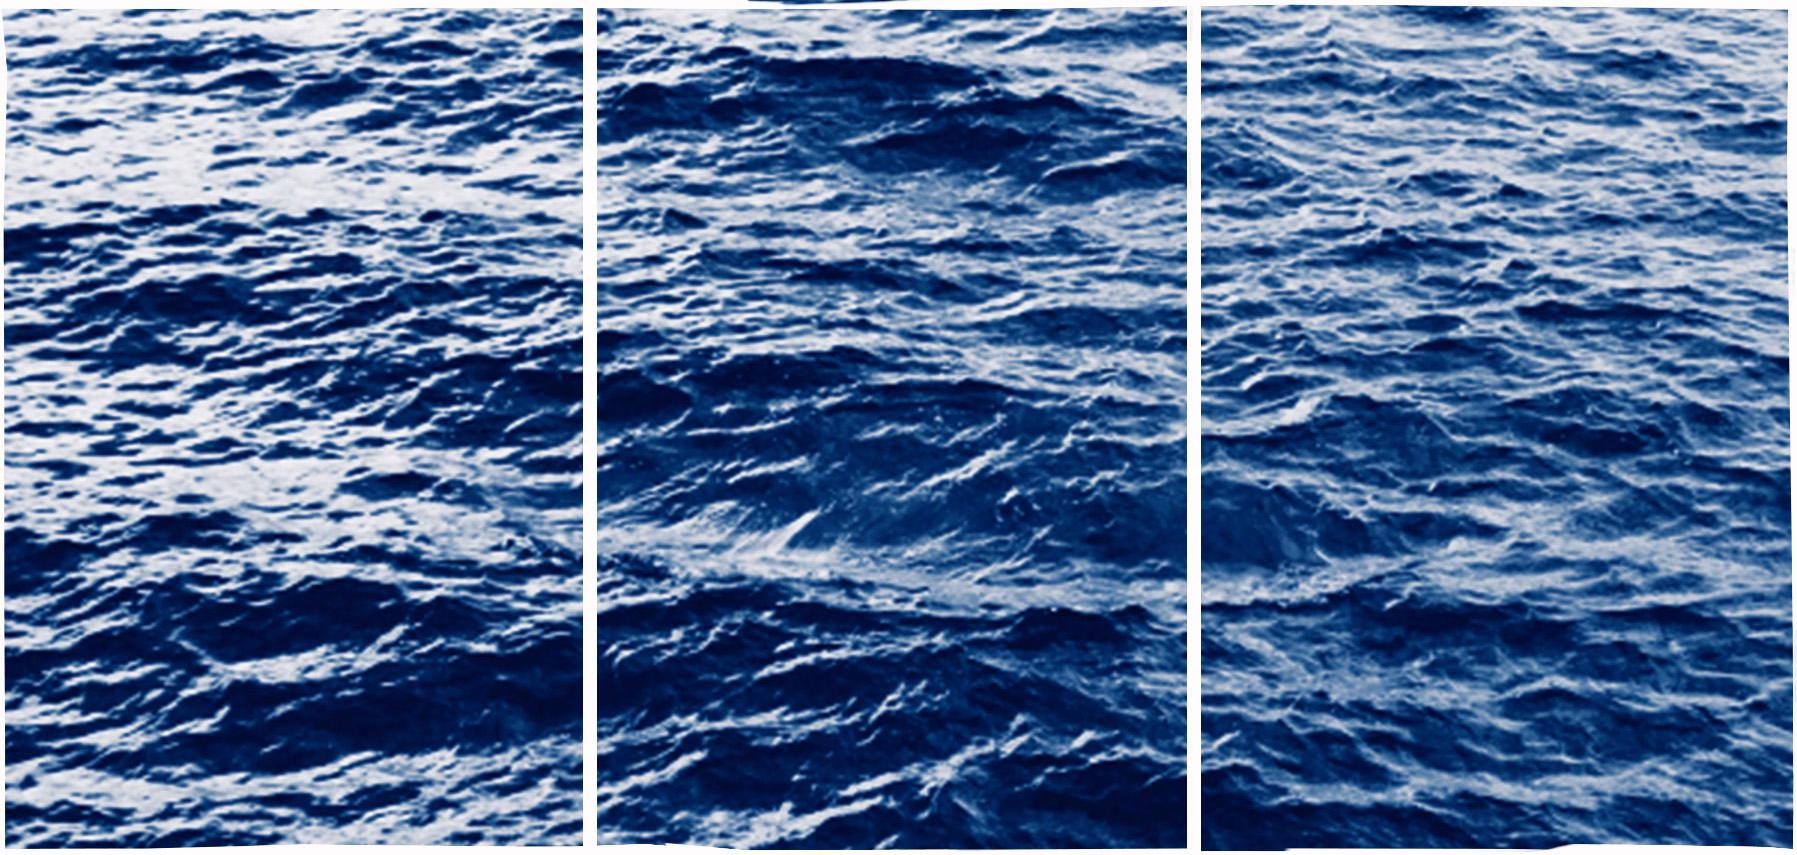 Kind of Cyan Abstract Print - Cyanotype Triptych of Endless Ocean Waves in Montauk, Large Seascape, 2020 